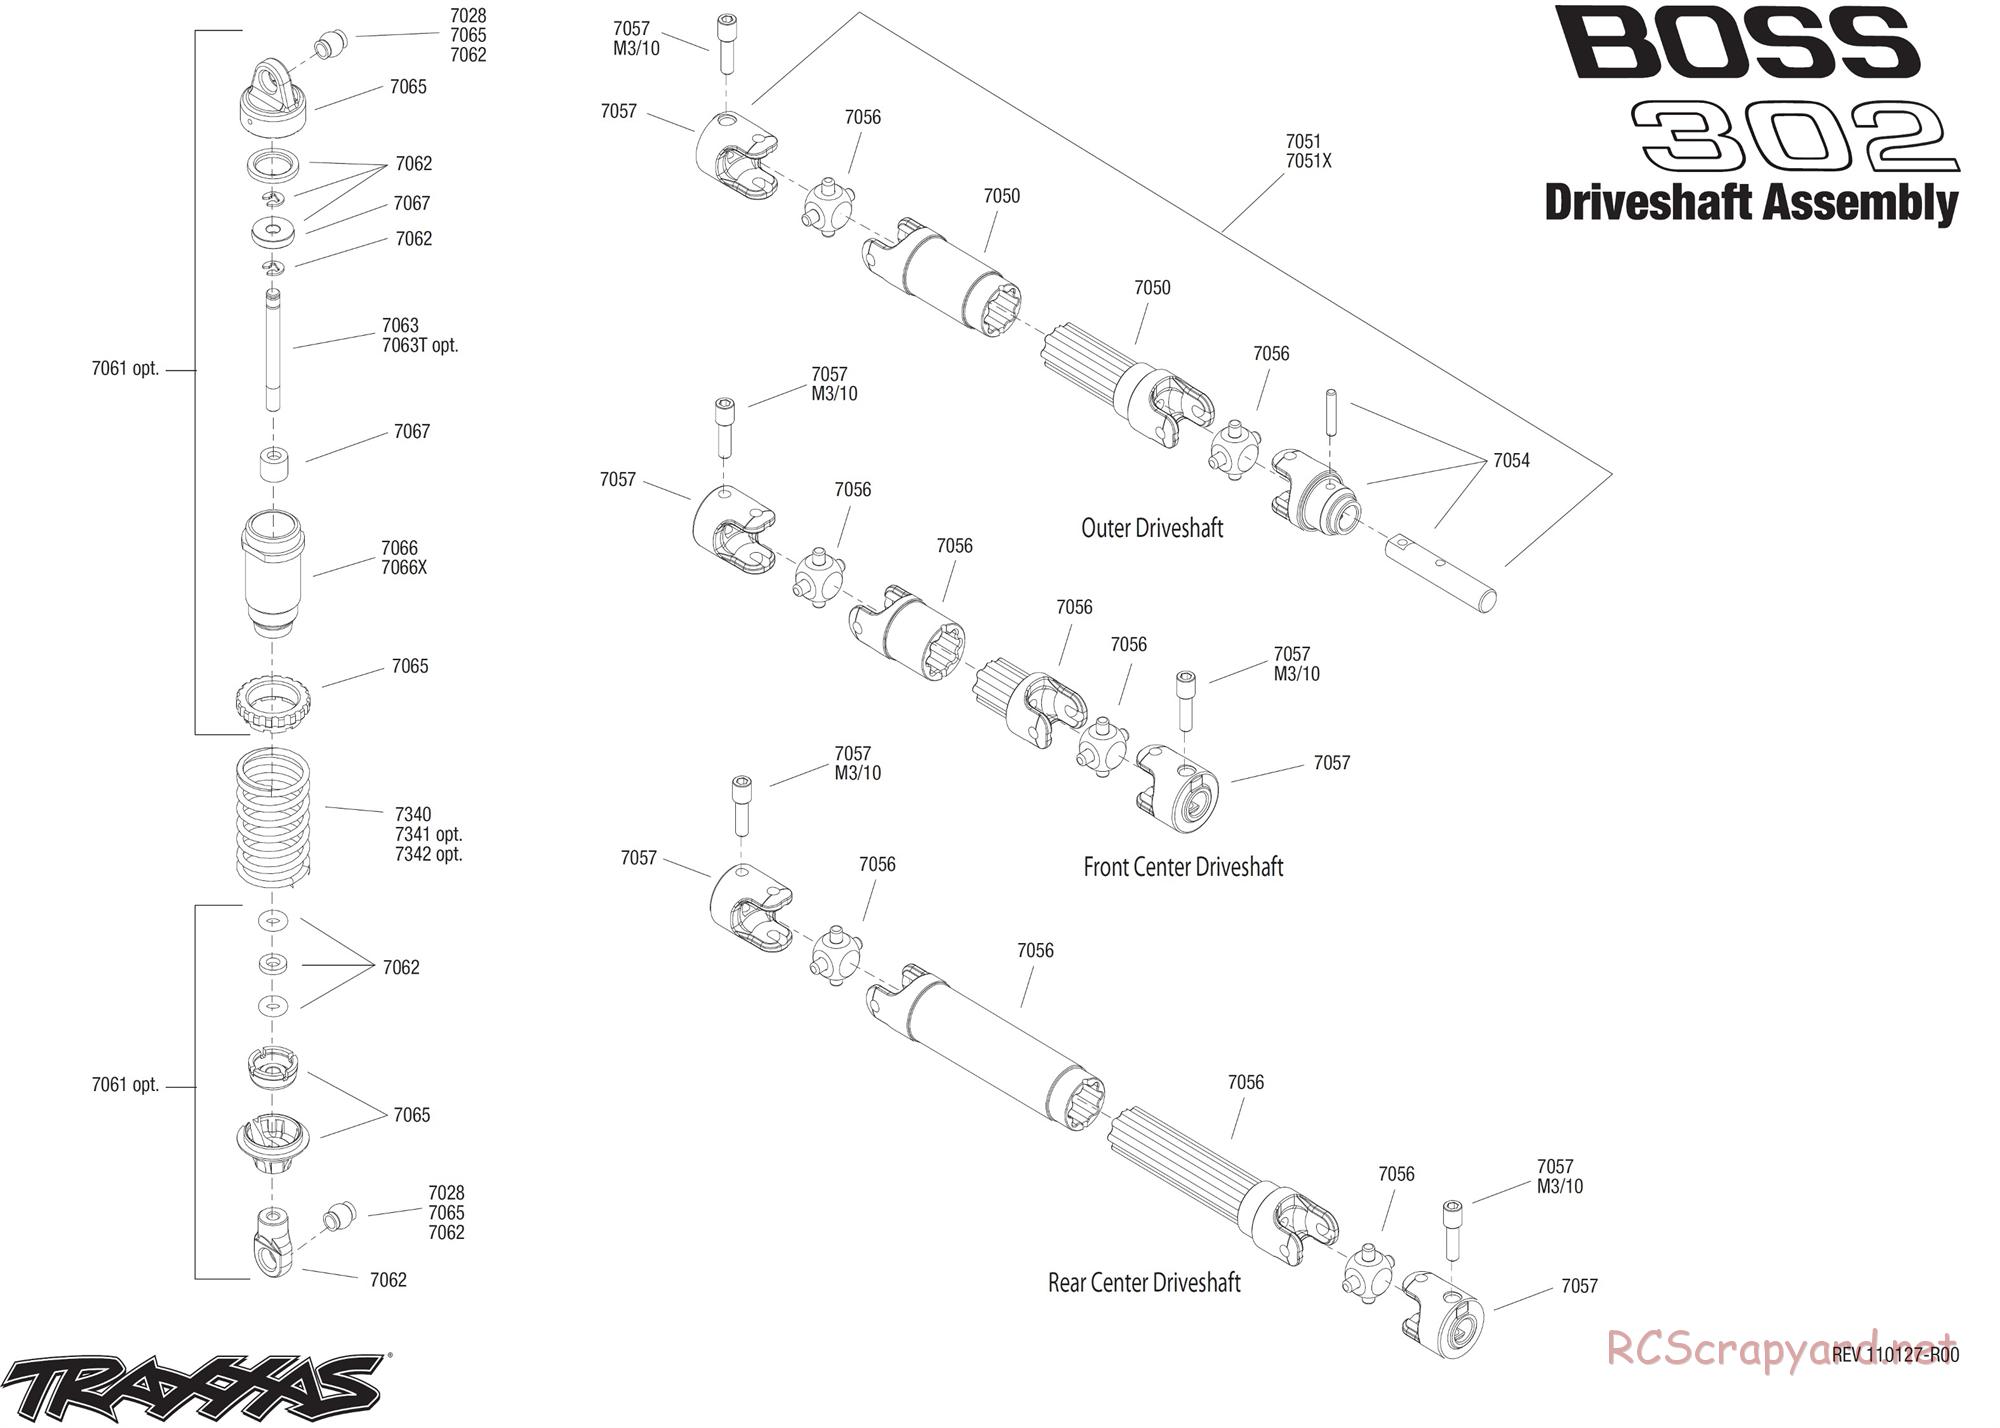 Traxxas - 1/16 Ford Mustang Boss 302 Brushless (2011) - Exploded Views - Page 2